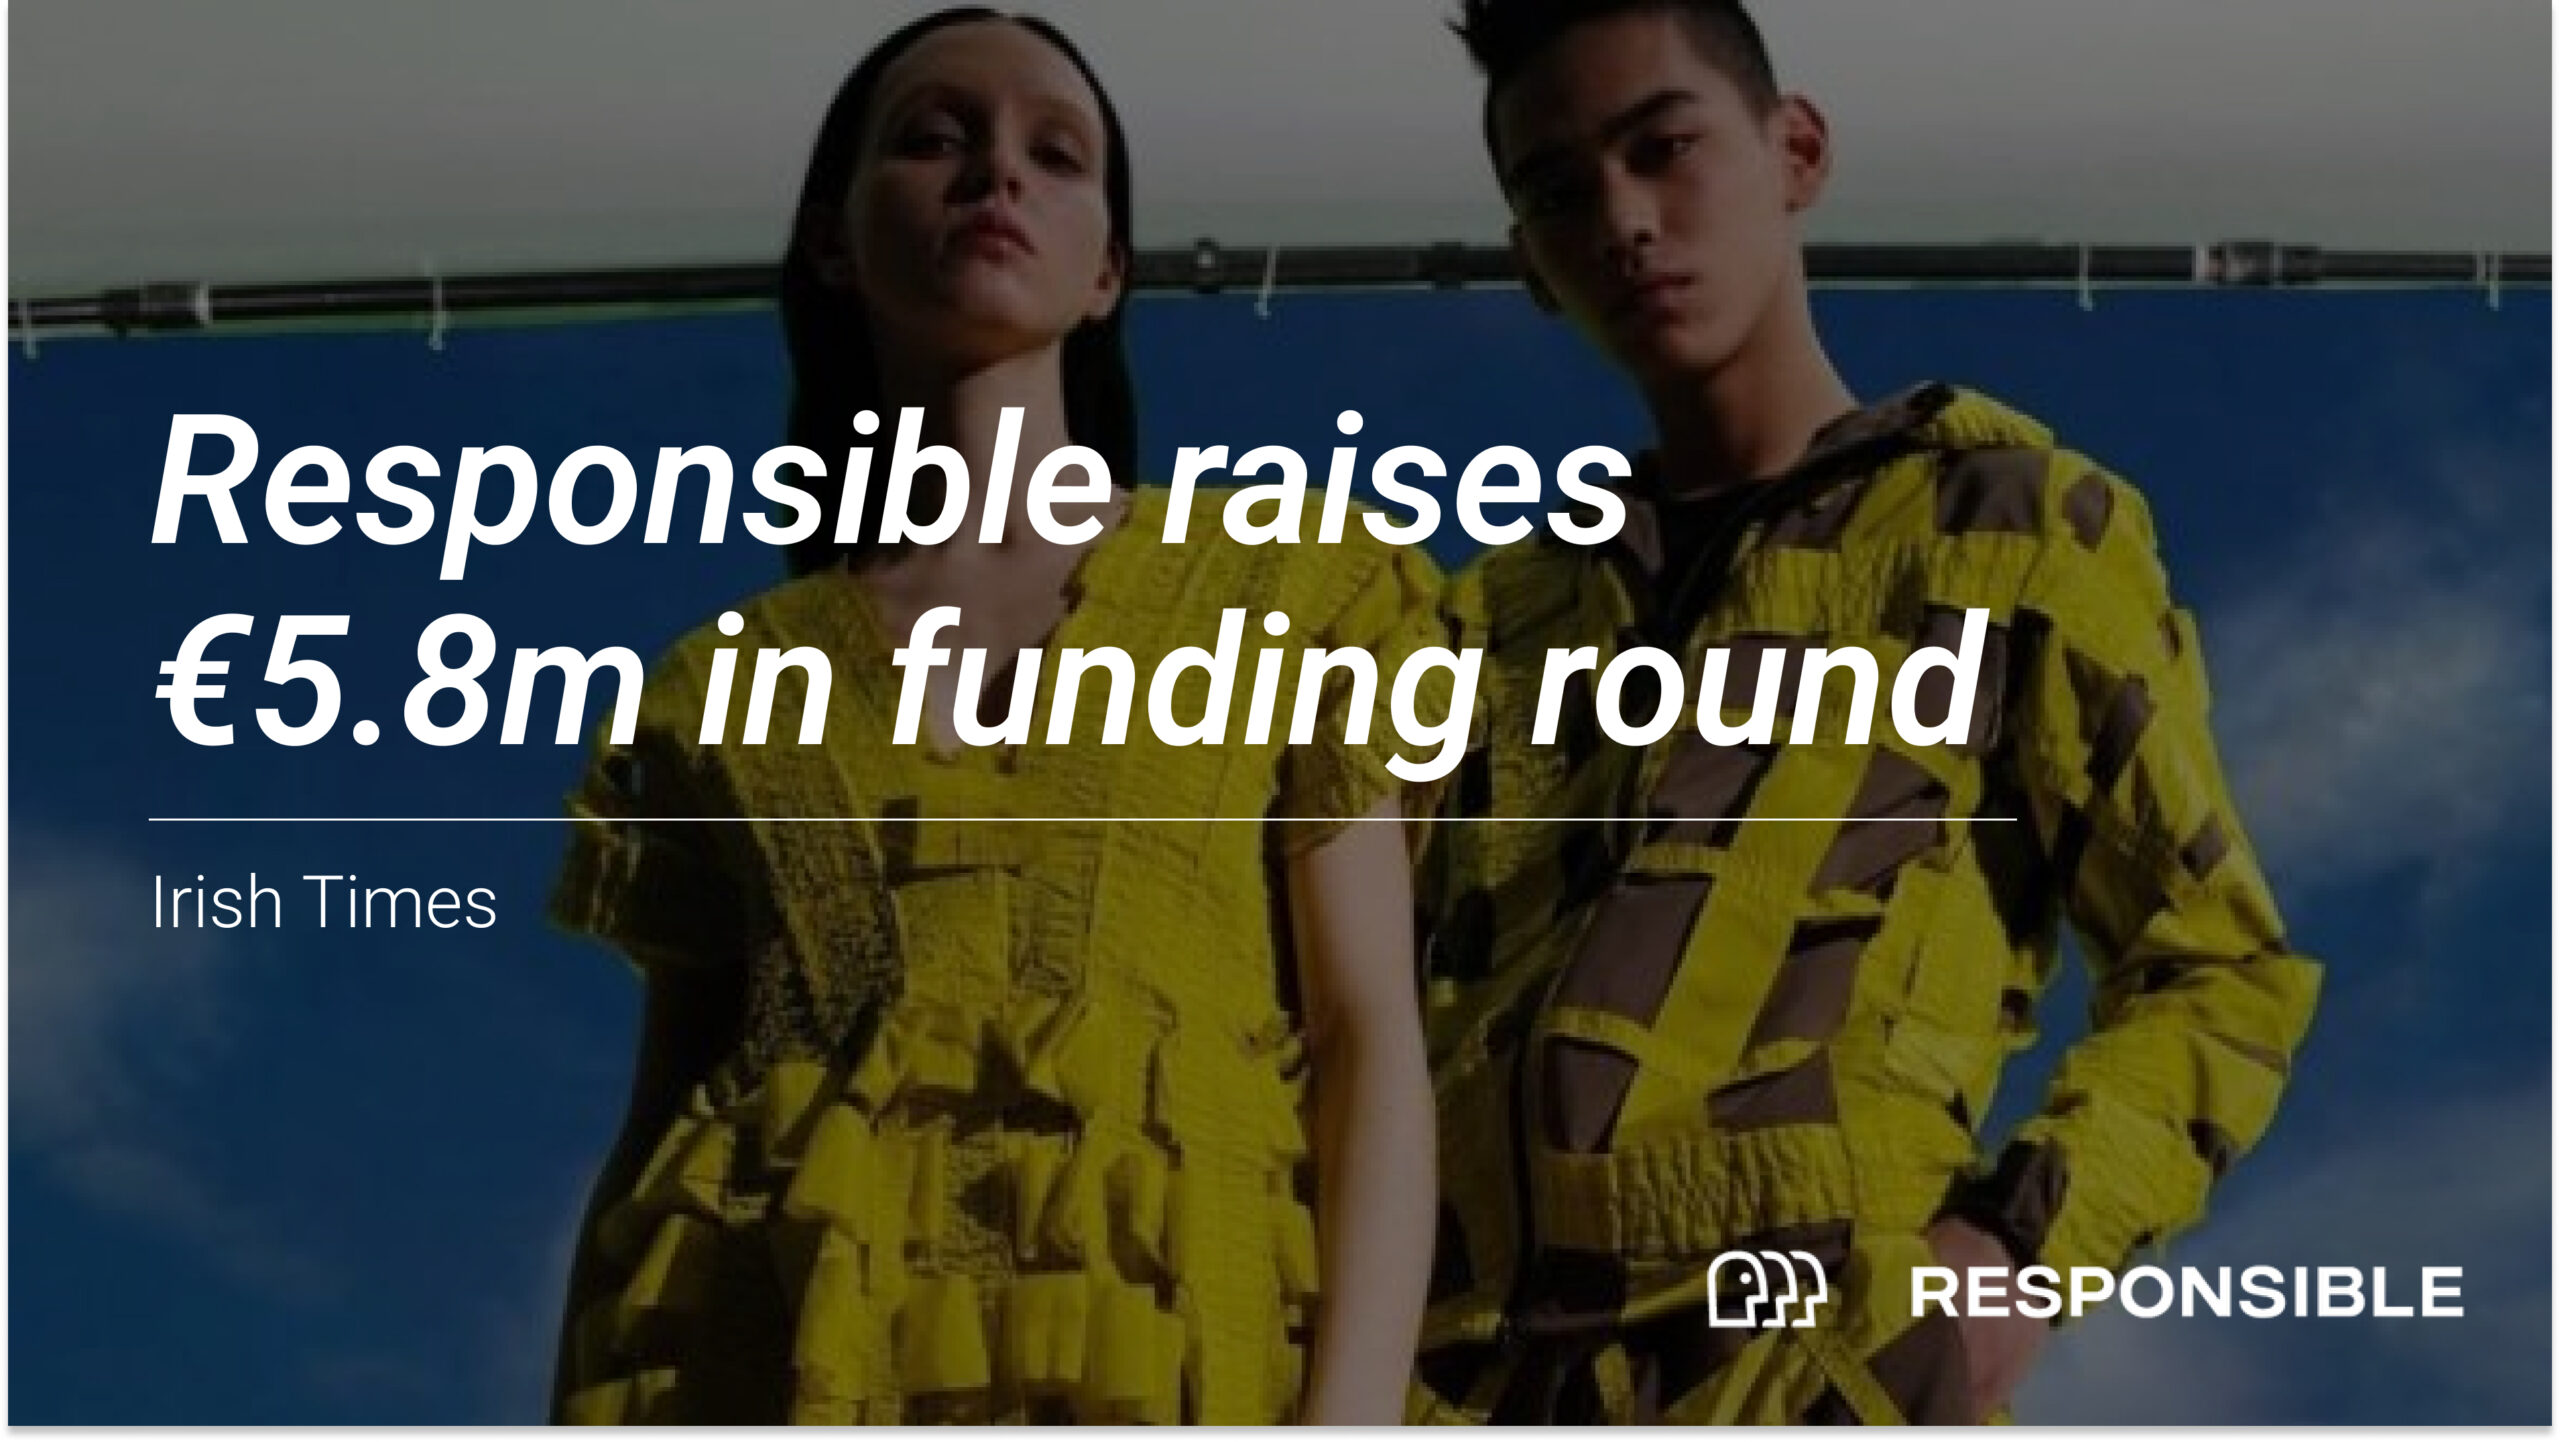 Responsible raises €5.8m in funding round led by Barclays